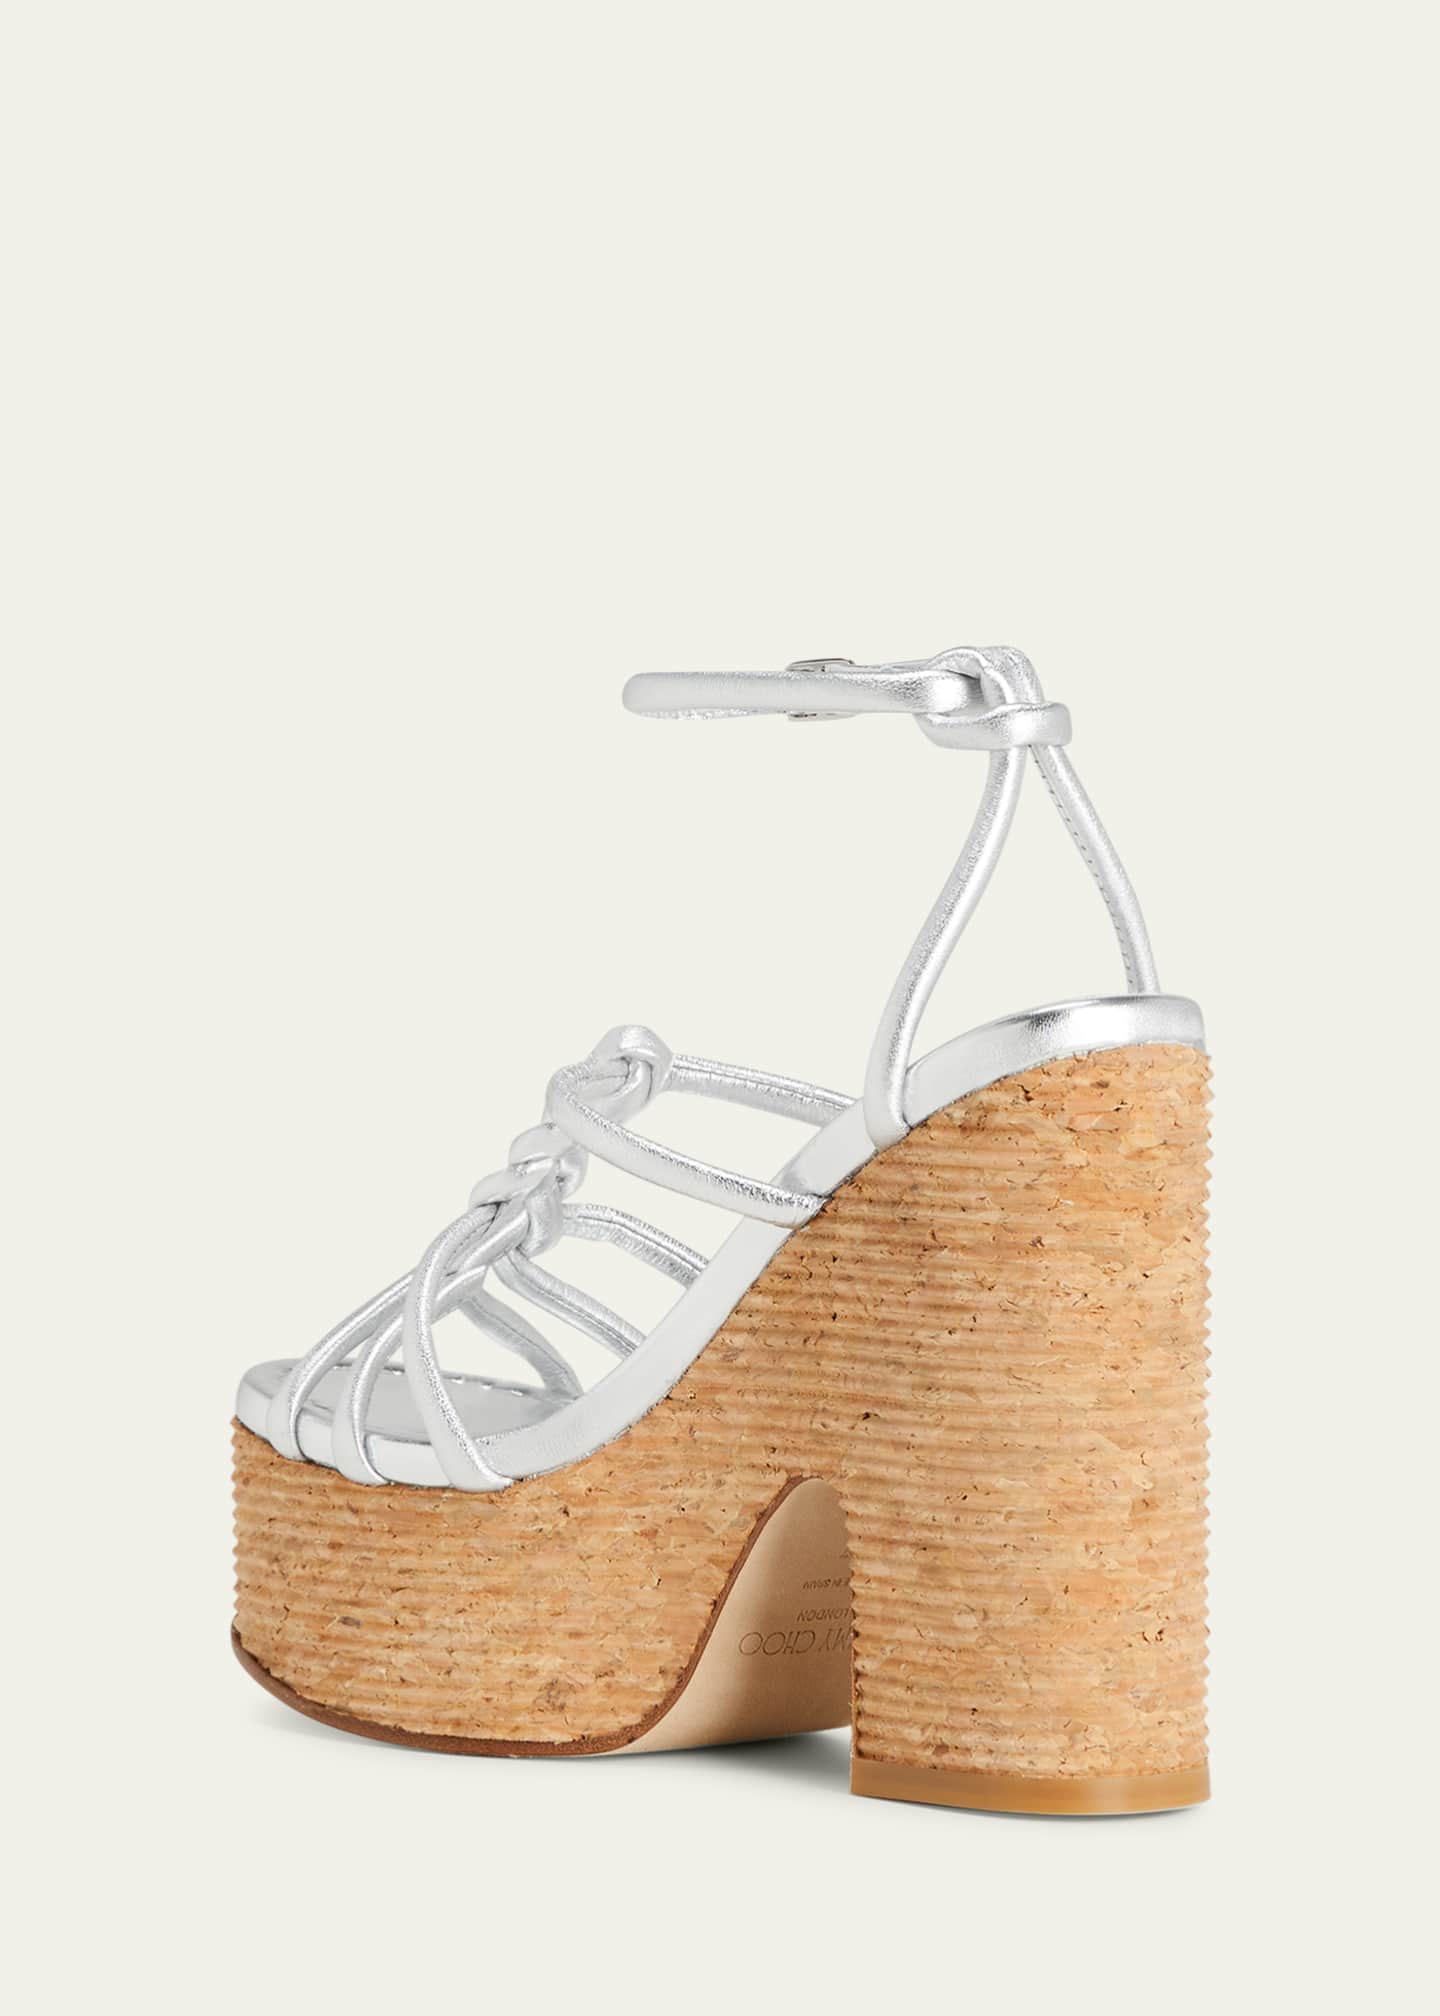 Jimmy Choo Clare 130 Wedge Sandals - Silver - 37